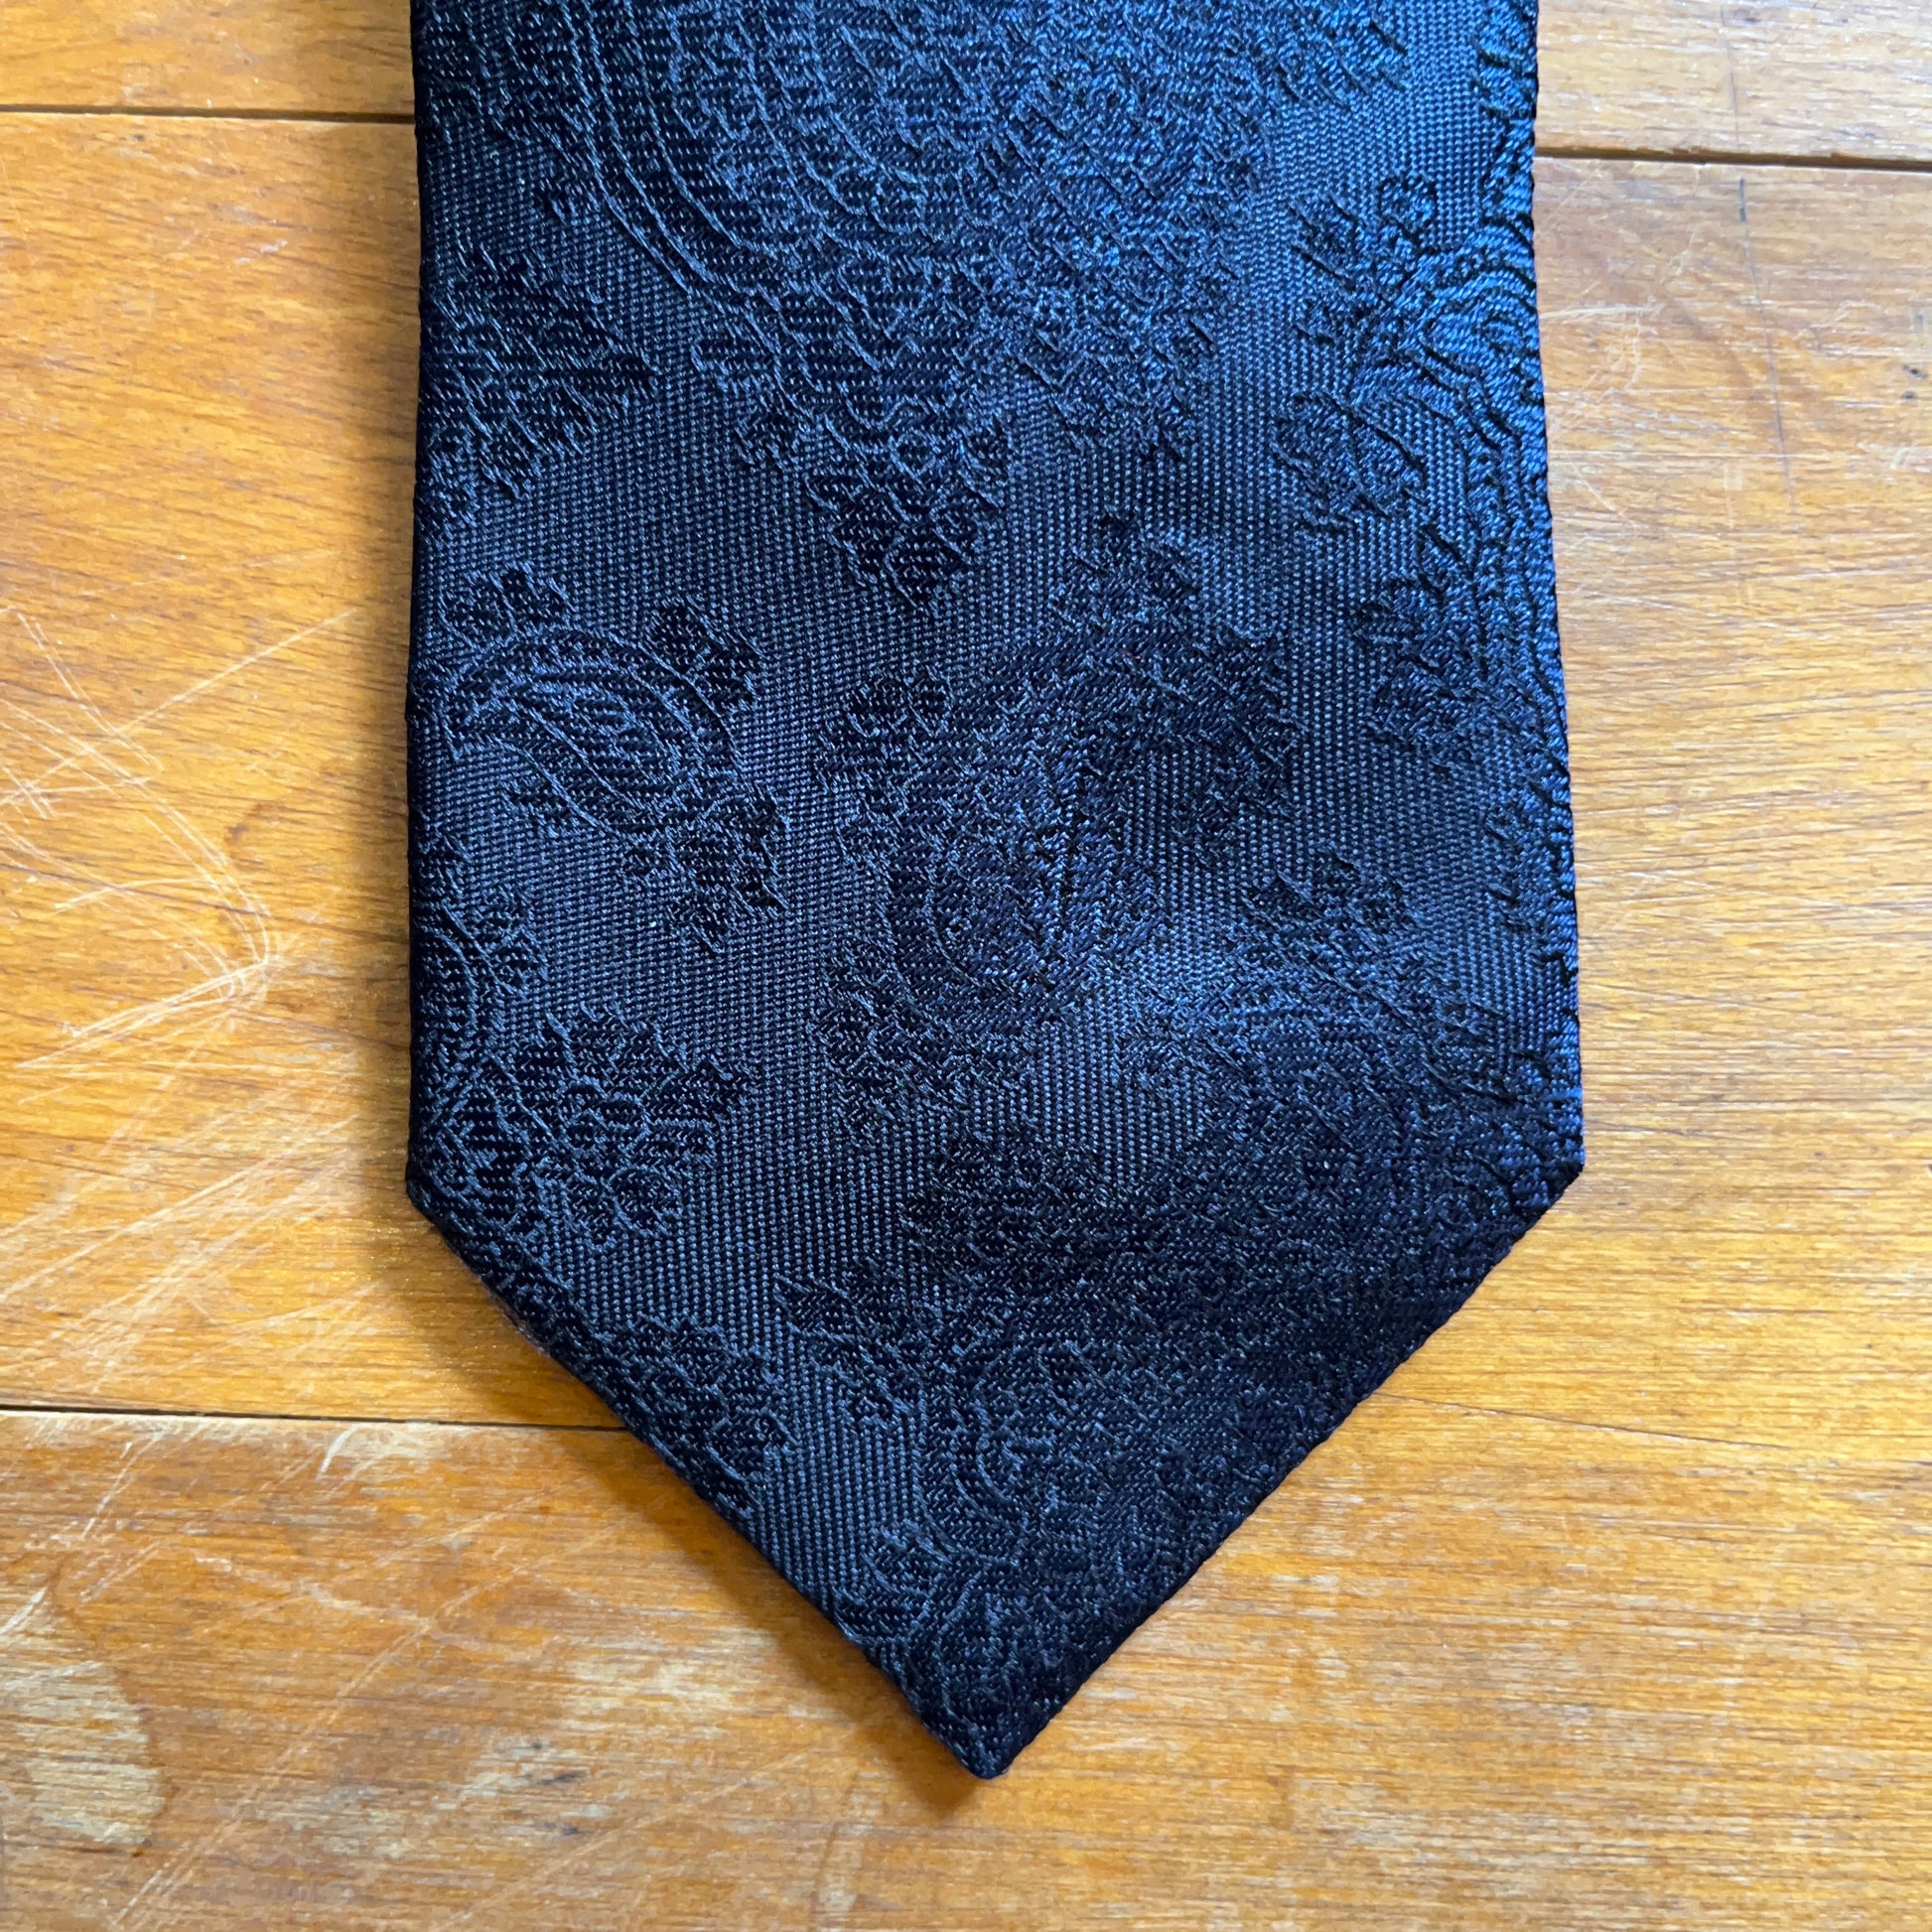 Closeup of handmade black silk tie with paisley tie set against wooden boards